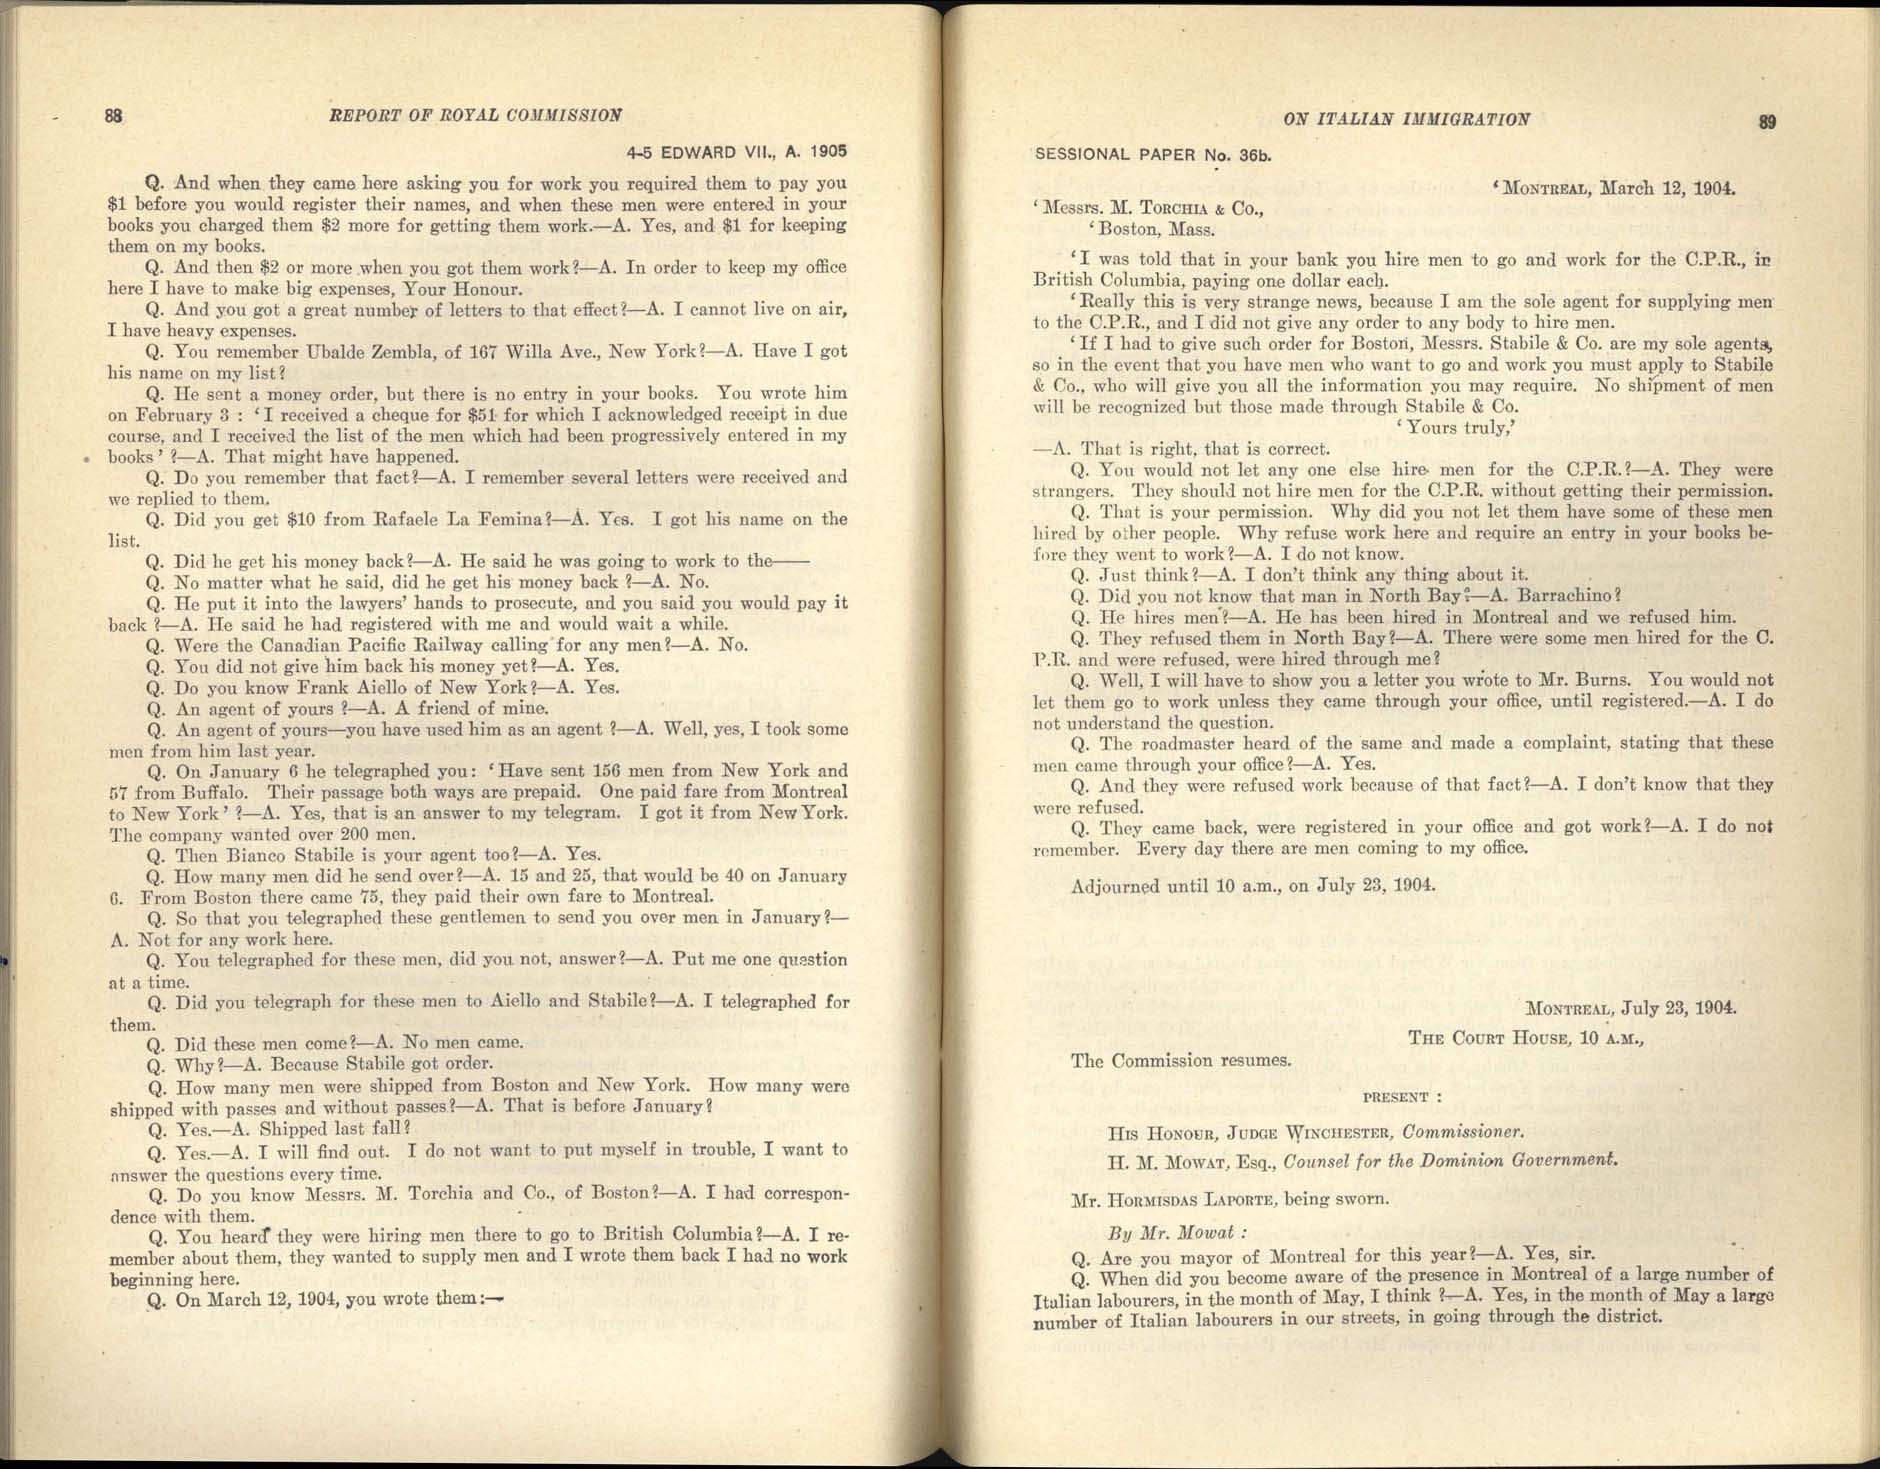 Page 88, 89 Royal Commission on Italian Immigration, 1904-1905